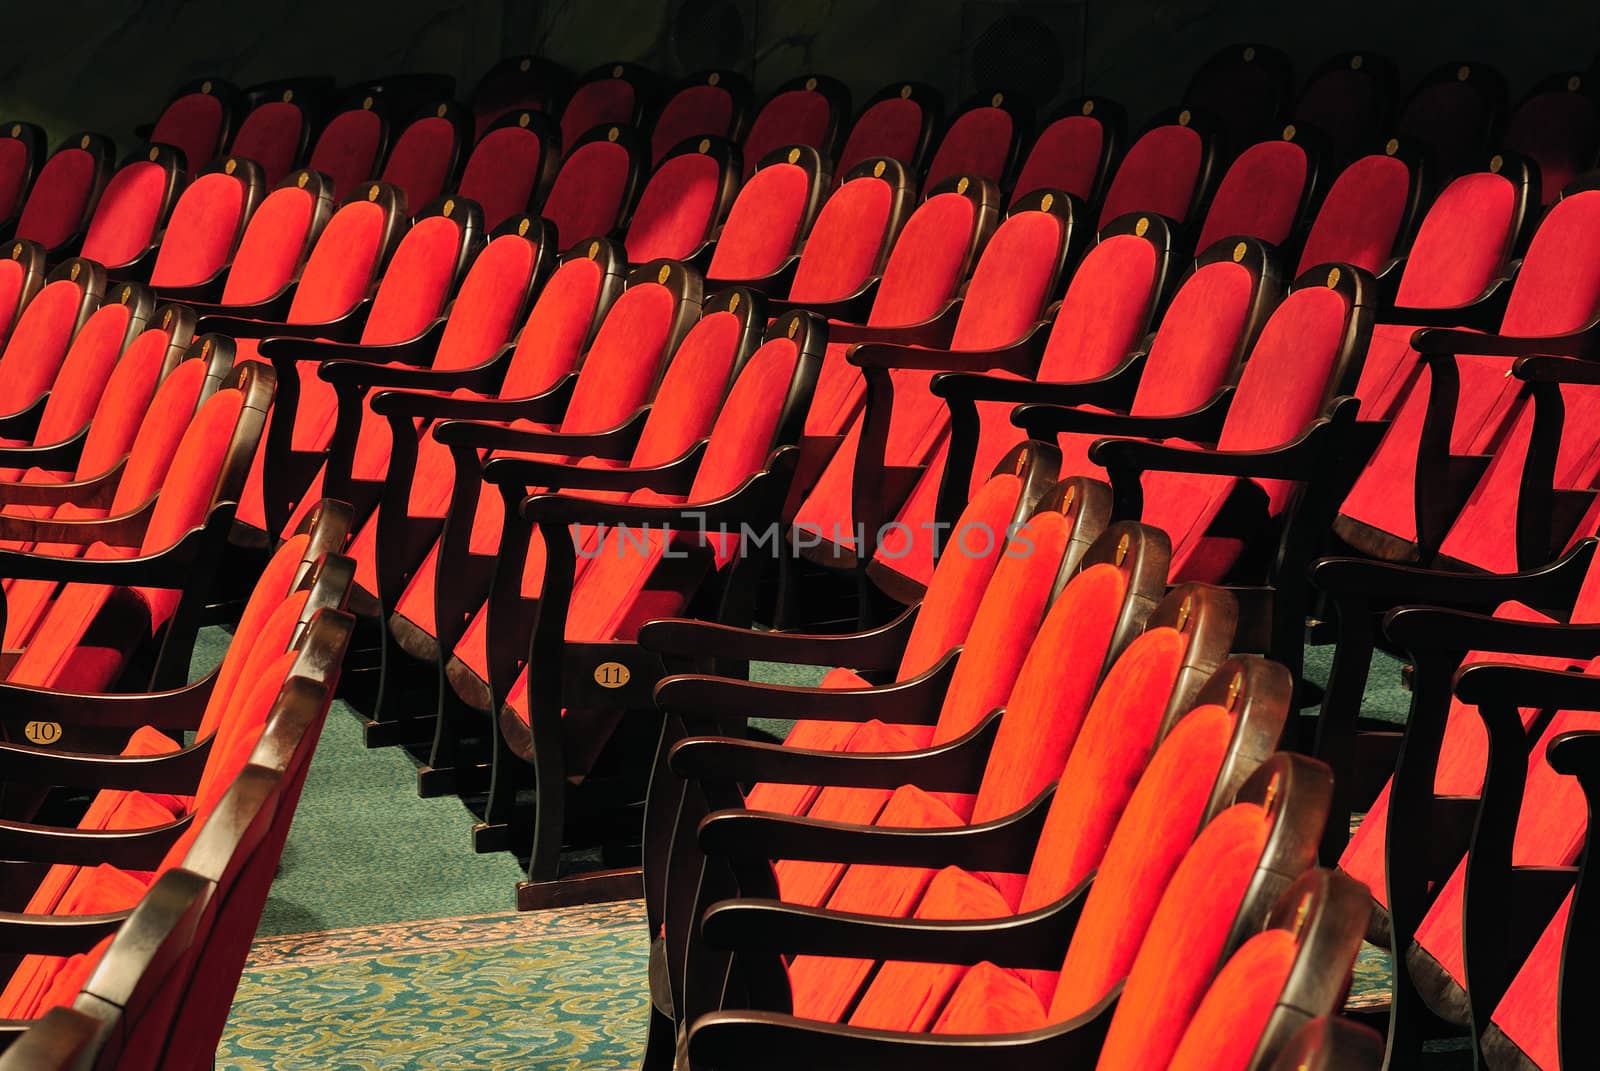 Theatrical chairs by styf22